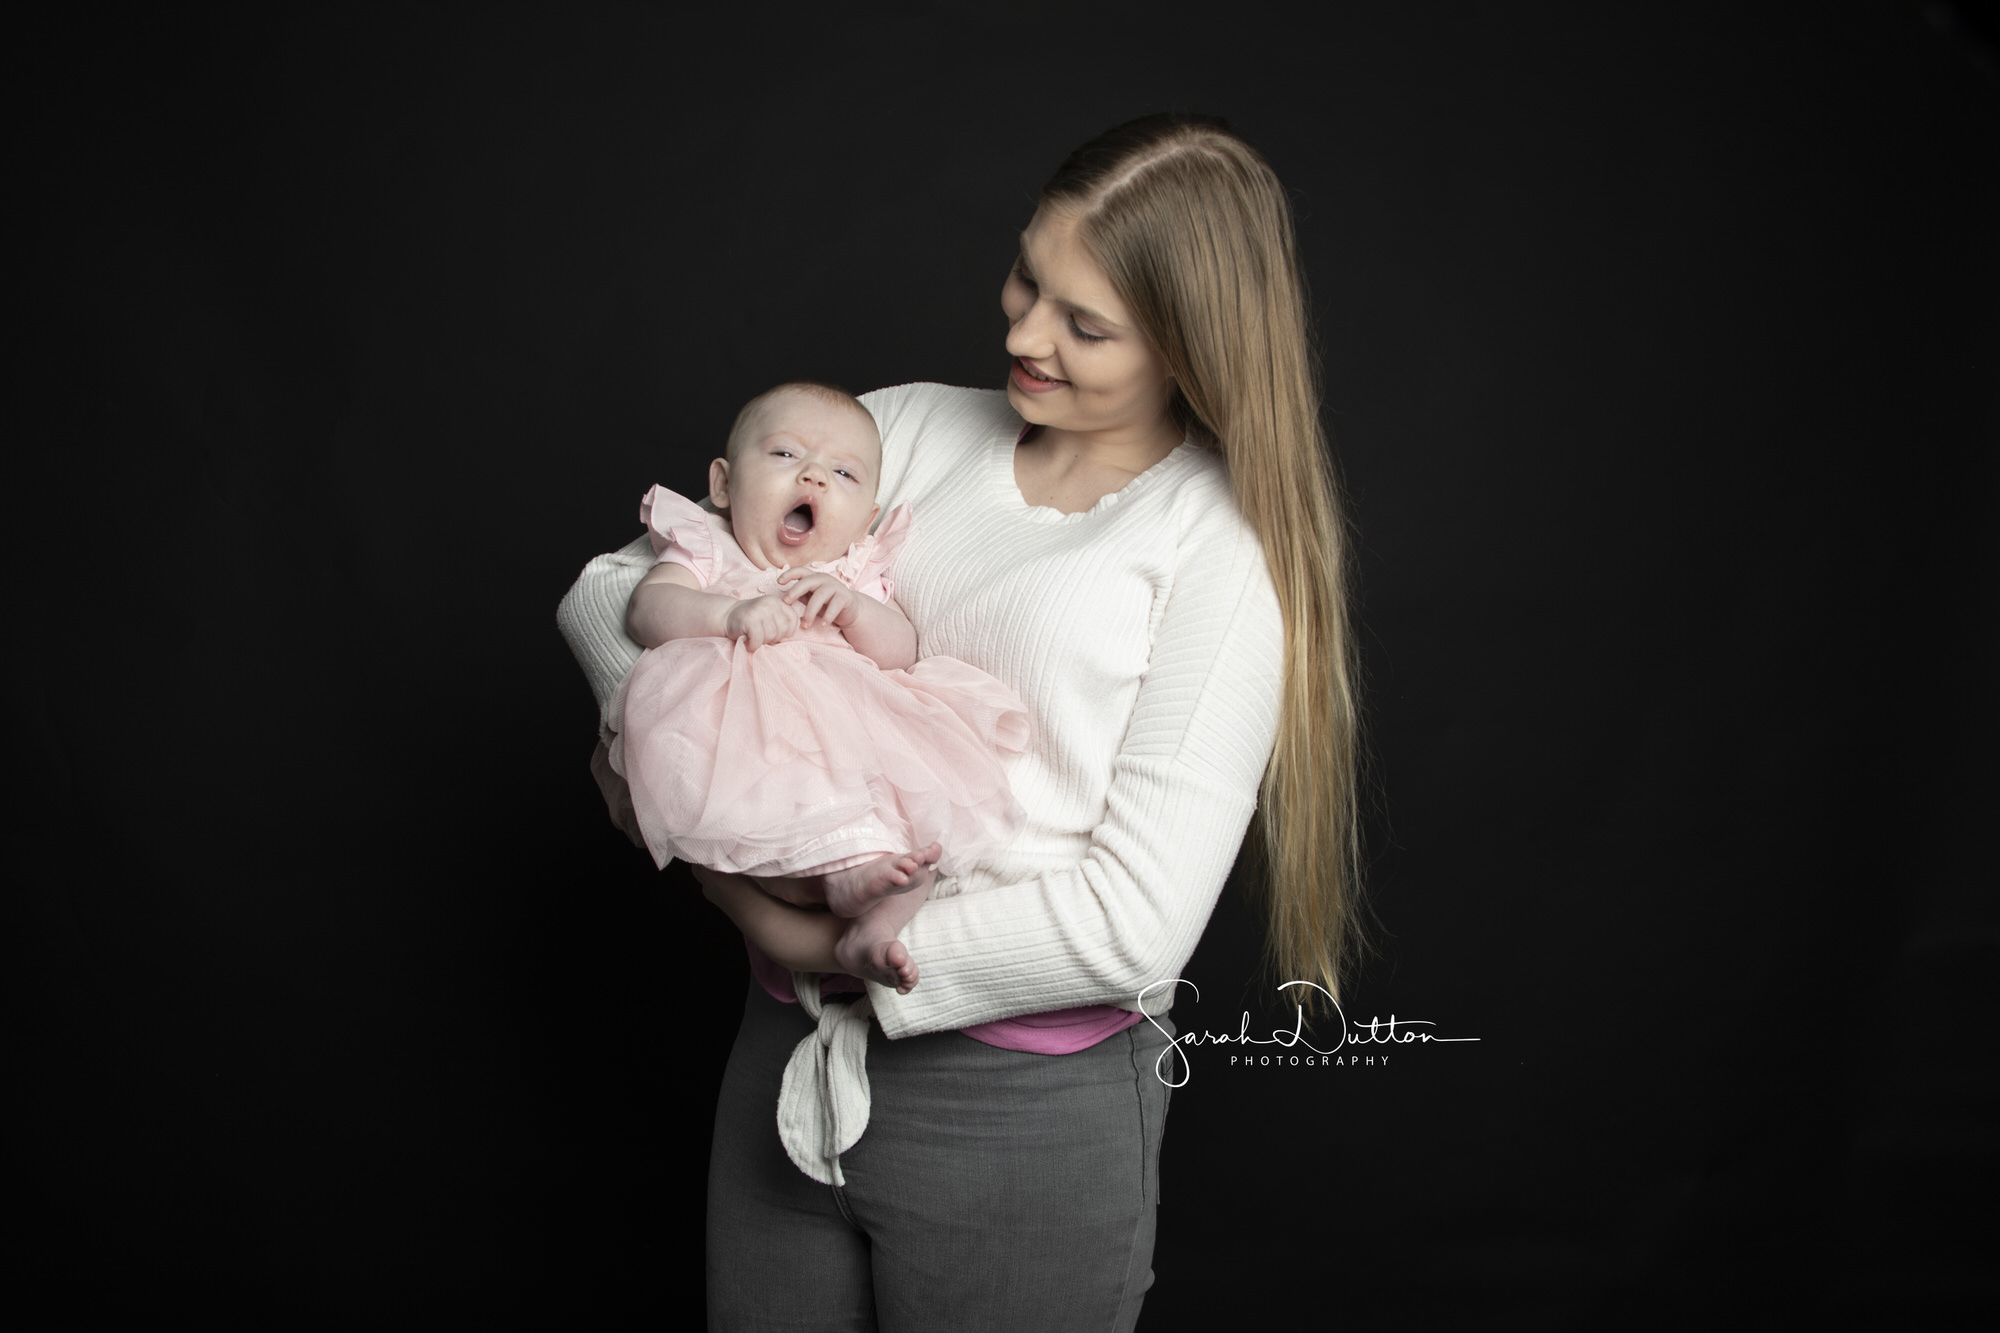 Family and Baby Photography taken in the Photography studio in Whitchurch Hampshire